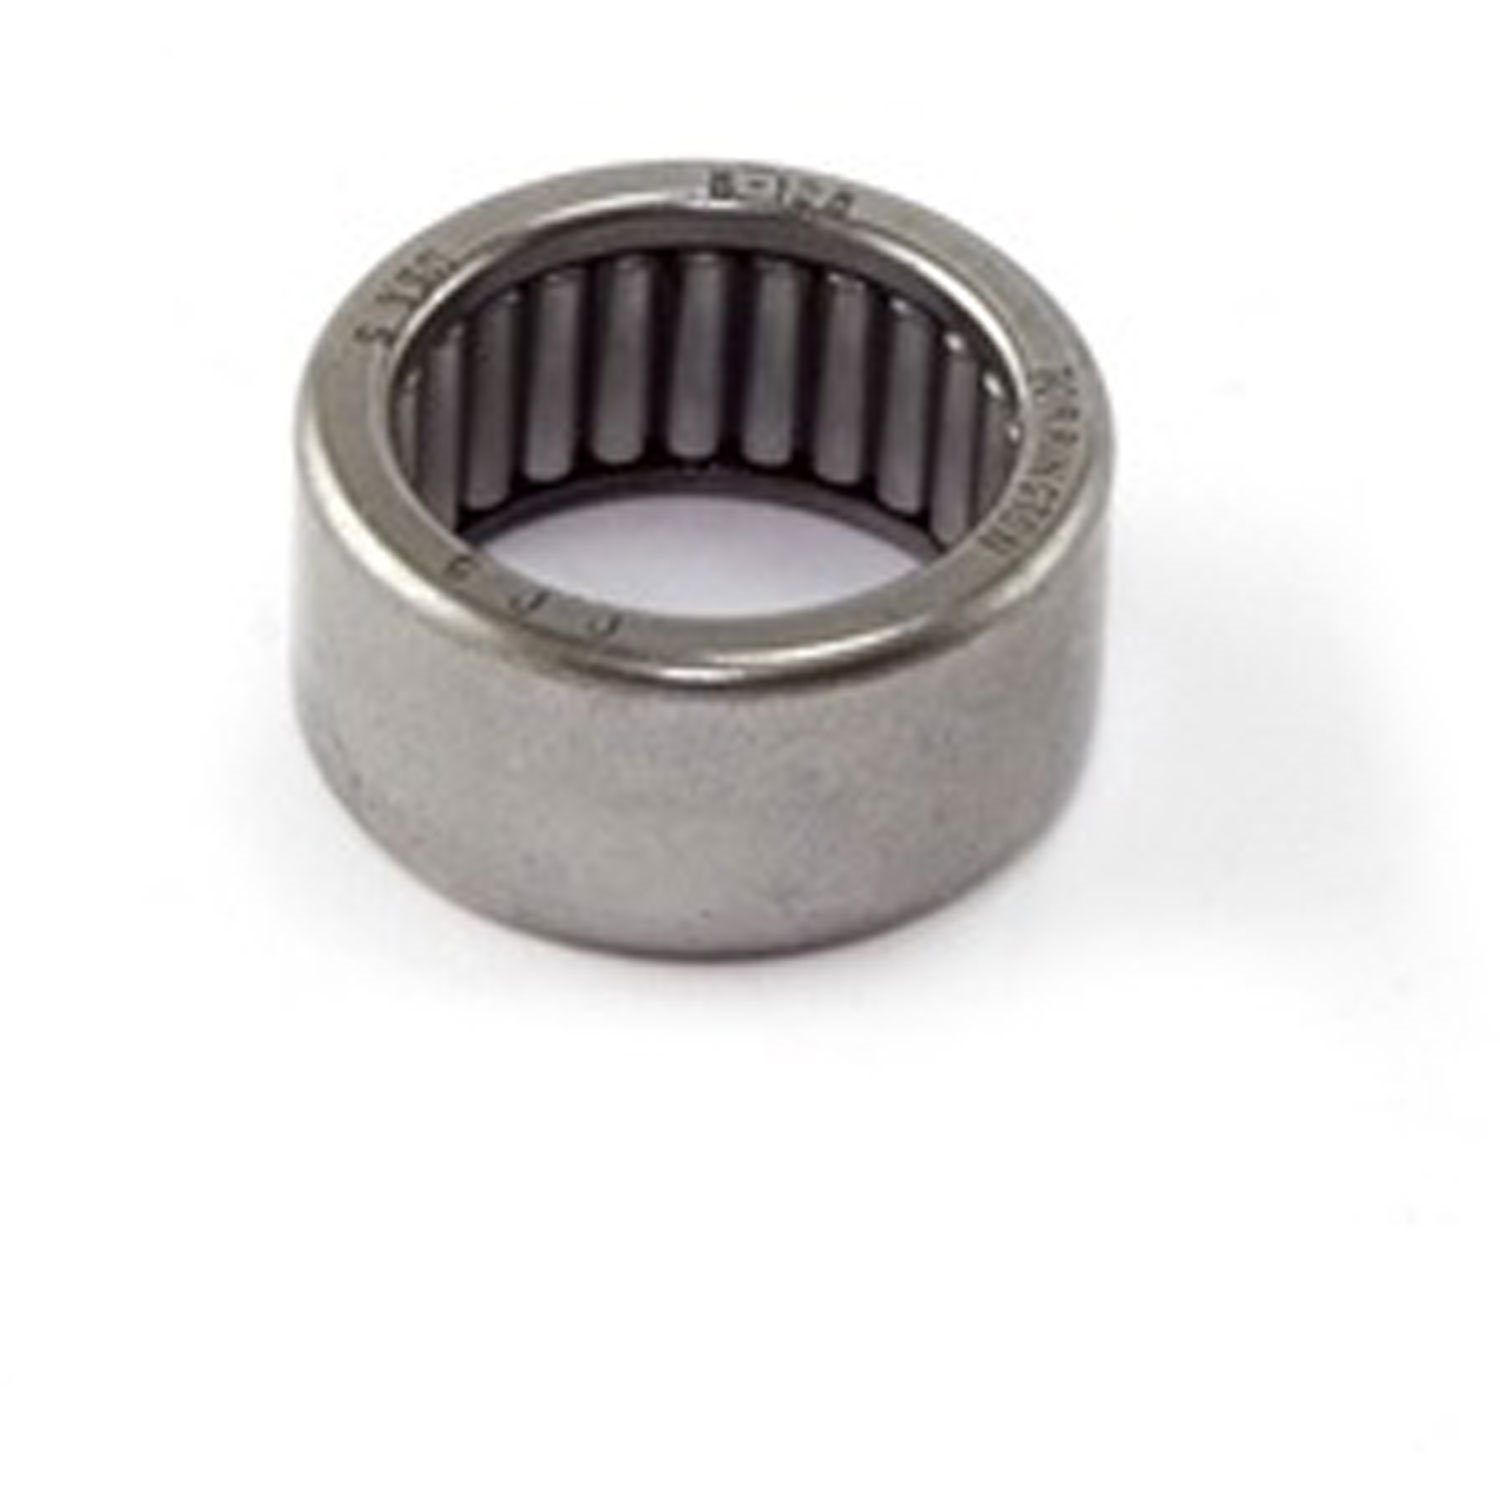 This clutch pedal bearing from Omix-ADA fits 71-81 Jeep CJs and 81-91 Jeep SJ Cherokees Wagoneers an